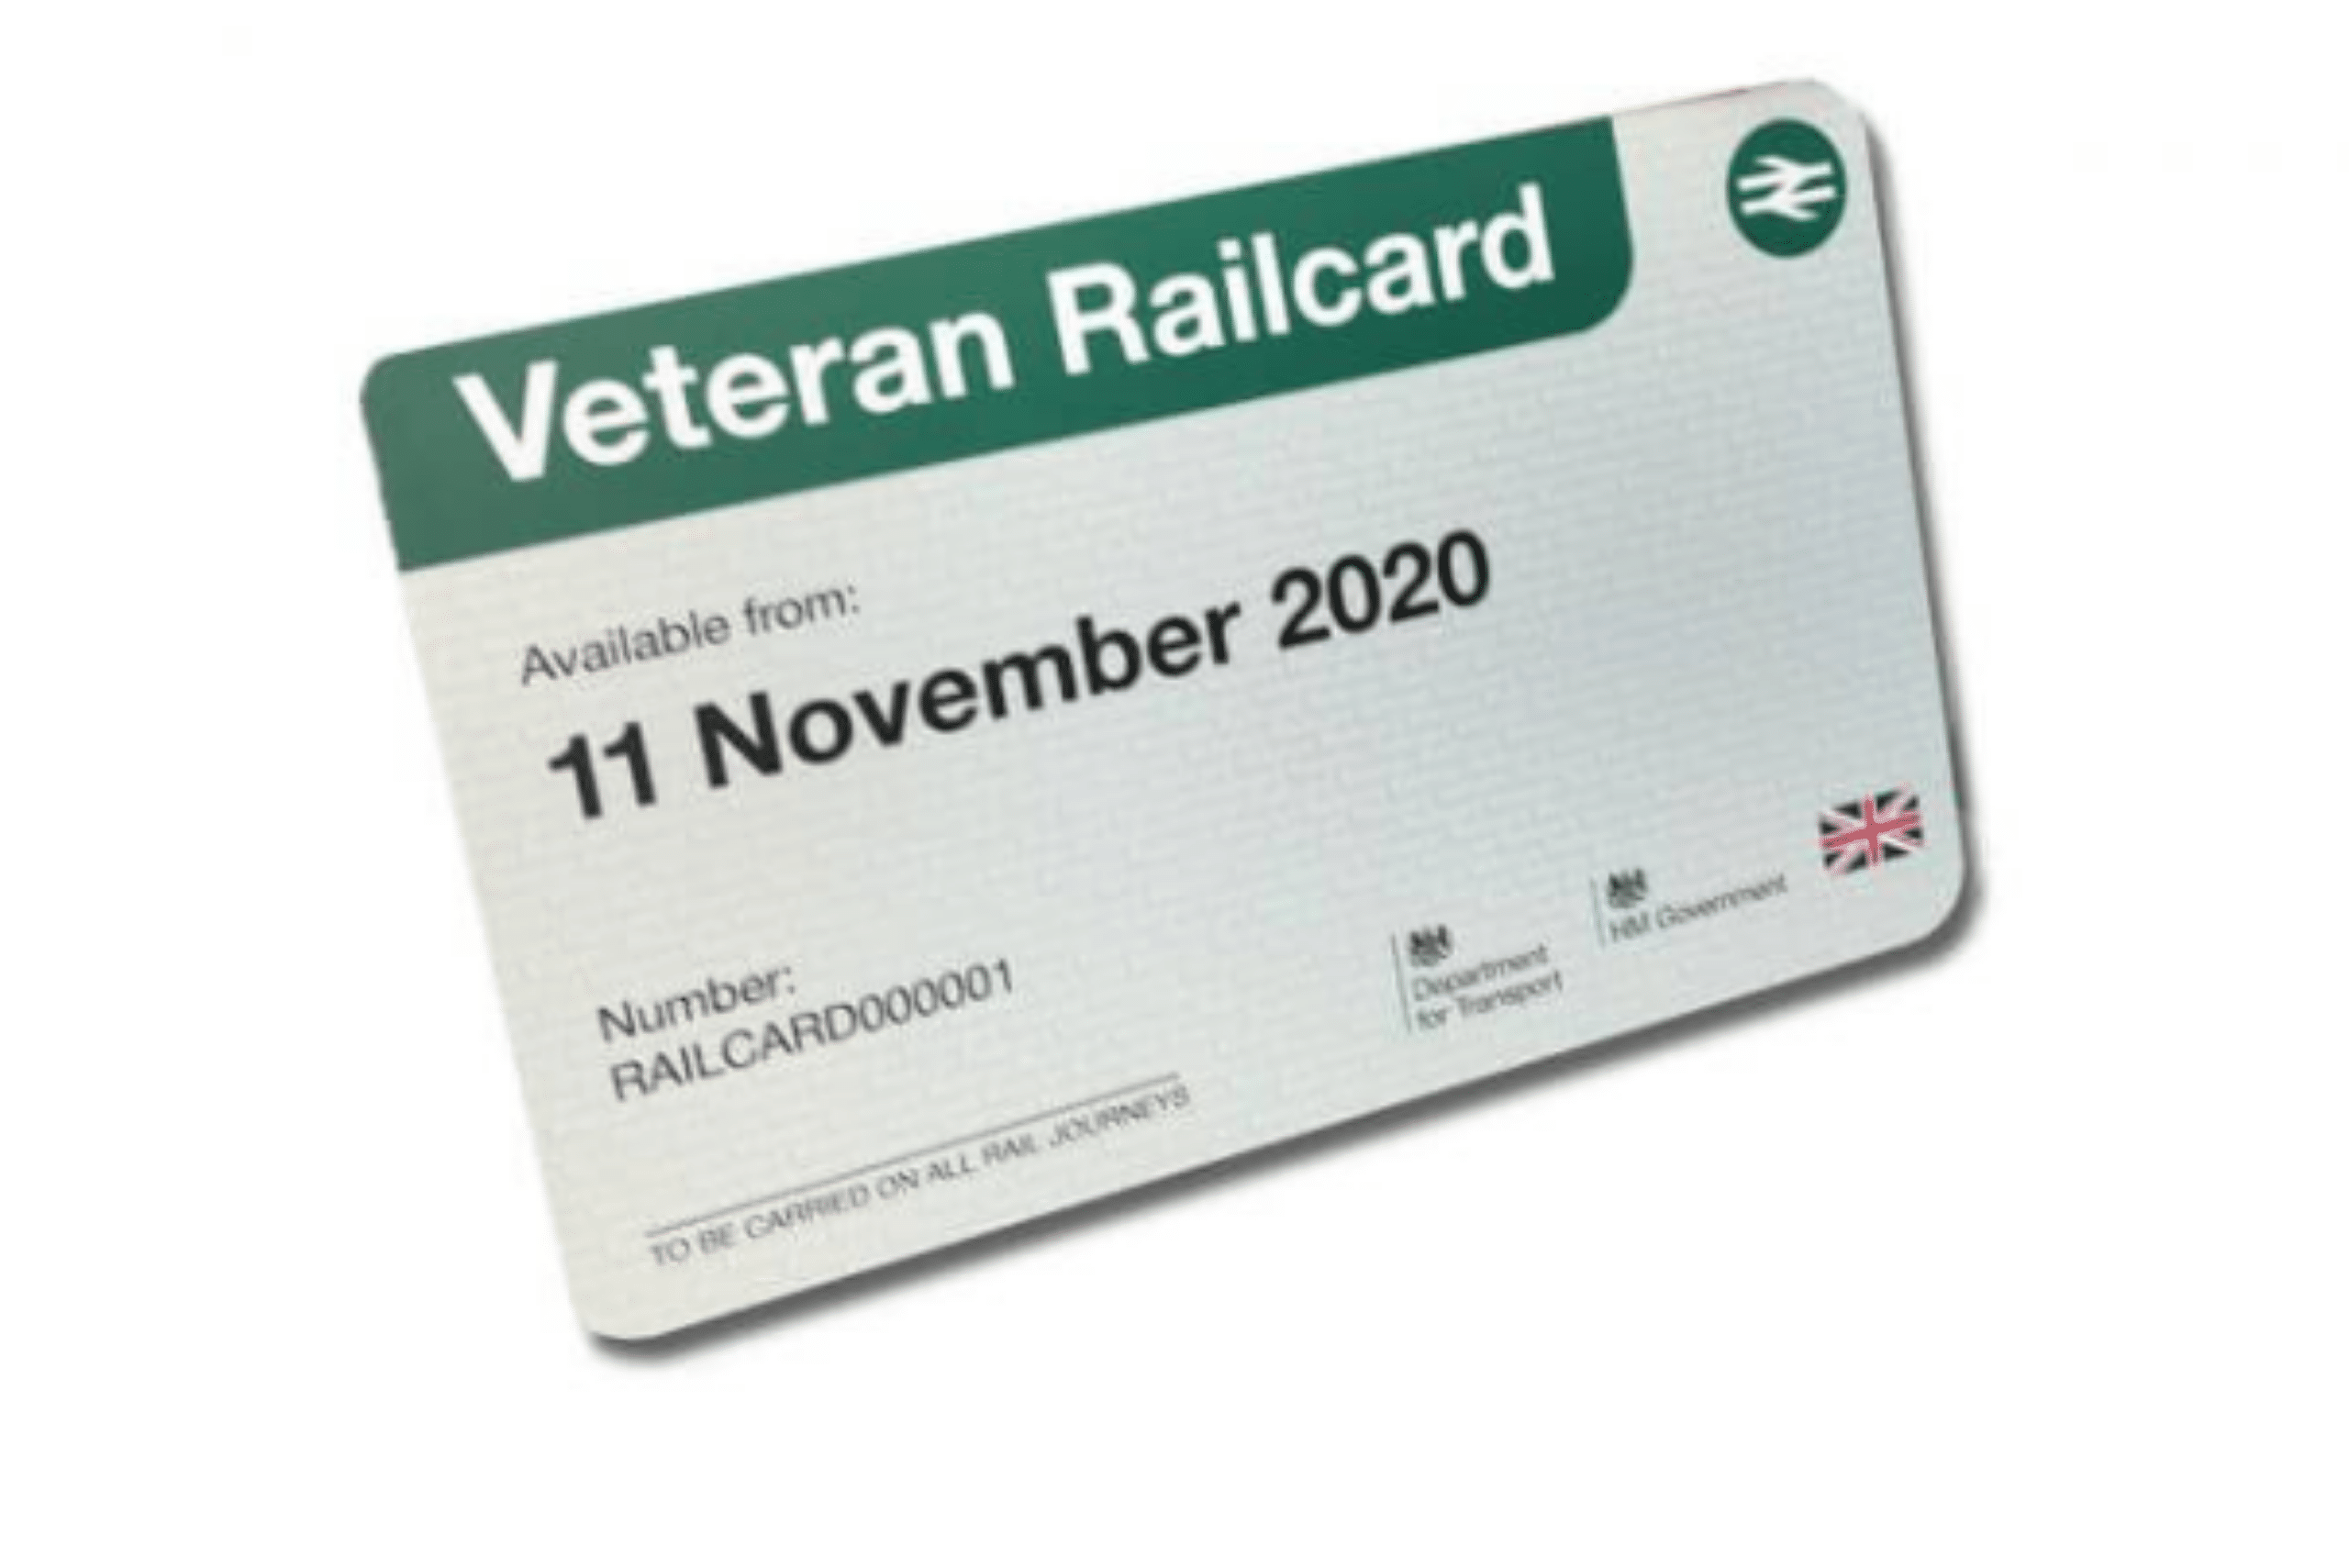 Veterans Rail Card Launch: How to Apply